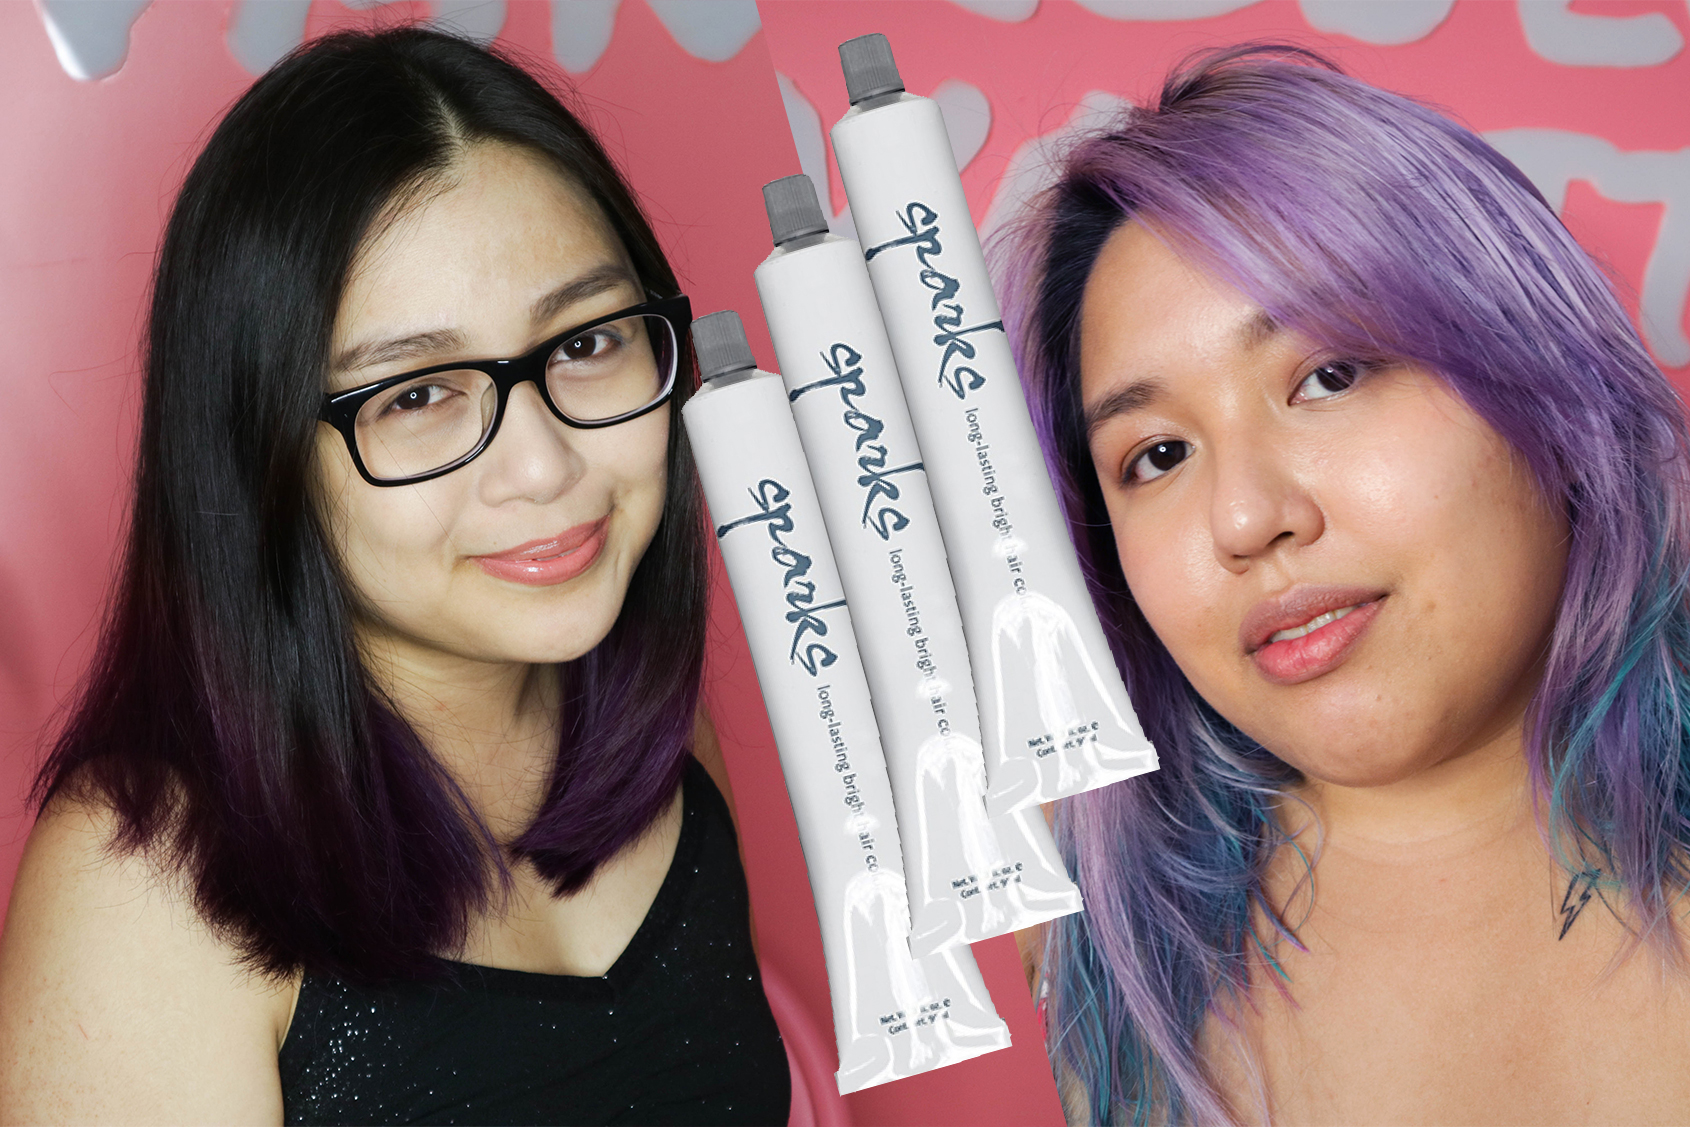 5. "DIY Guide for Dyeing Your Hair Light Purple and Light Blue" - wide 2